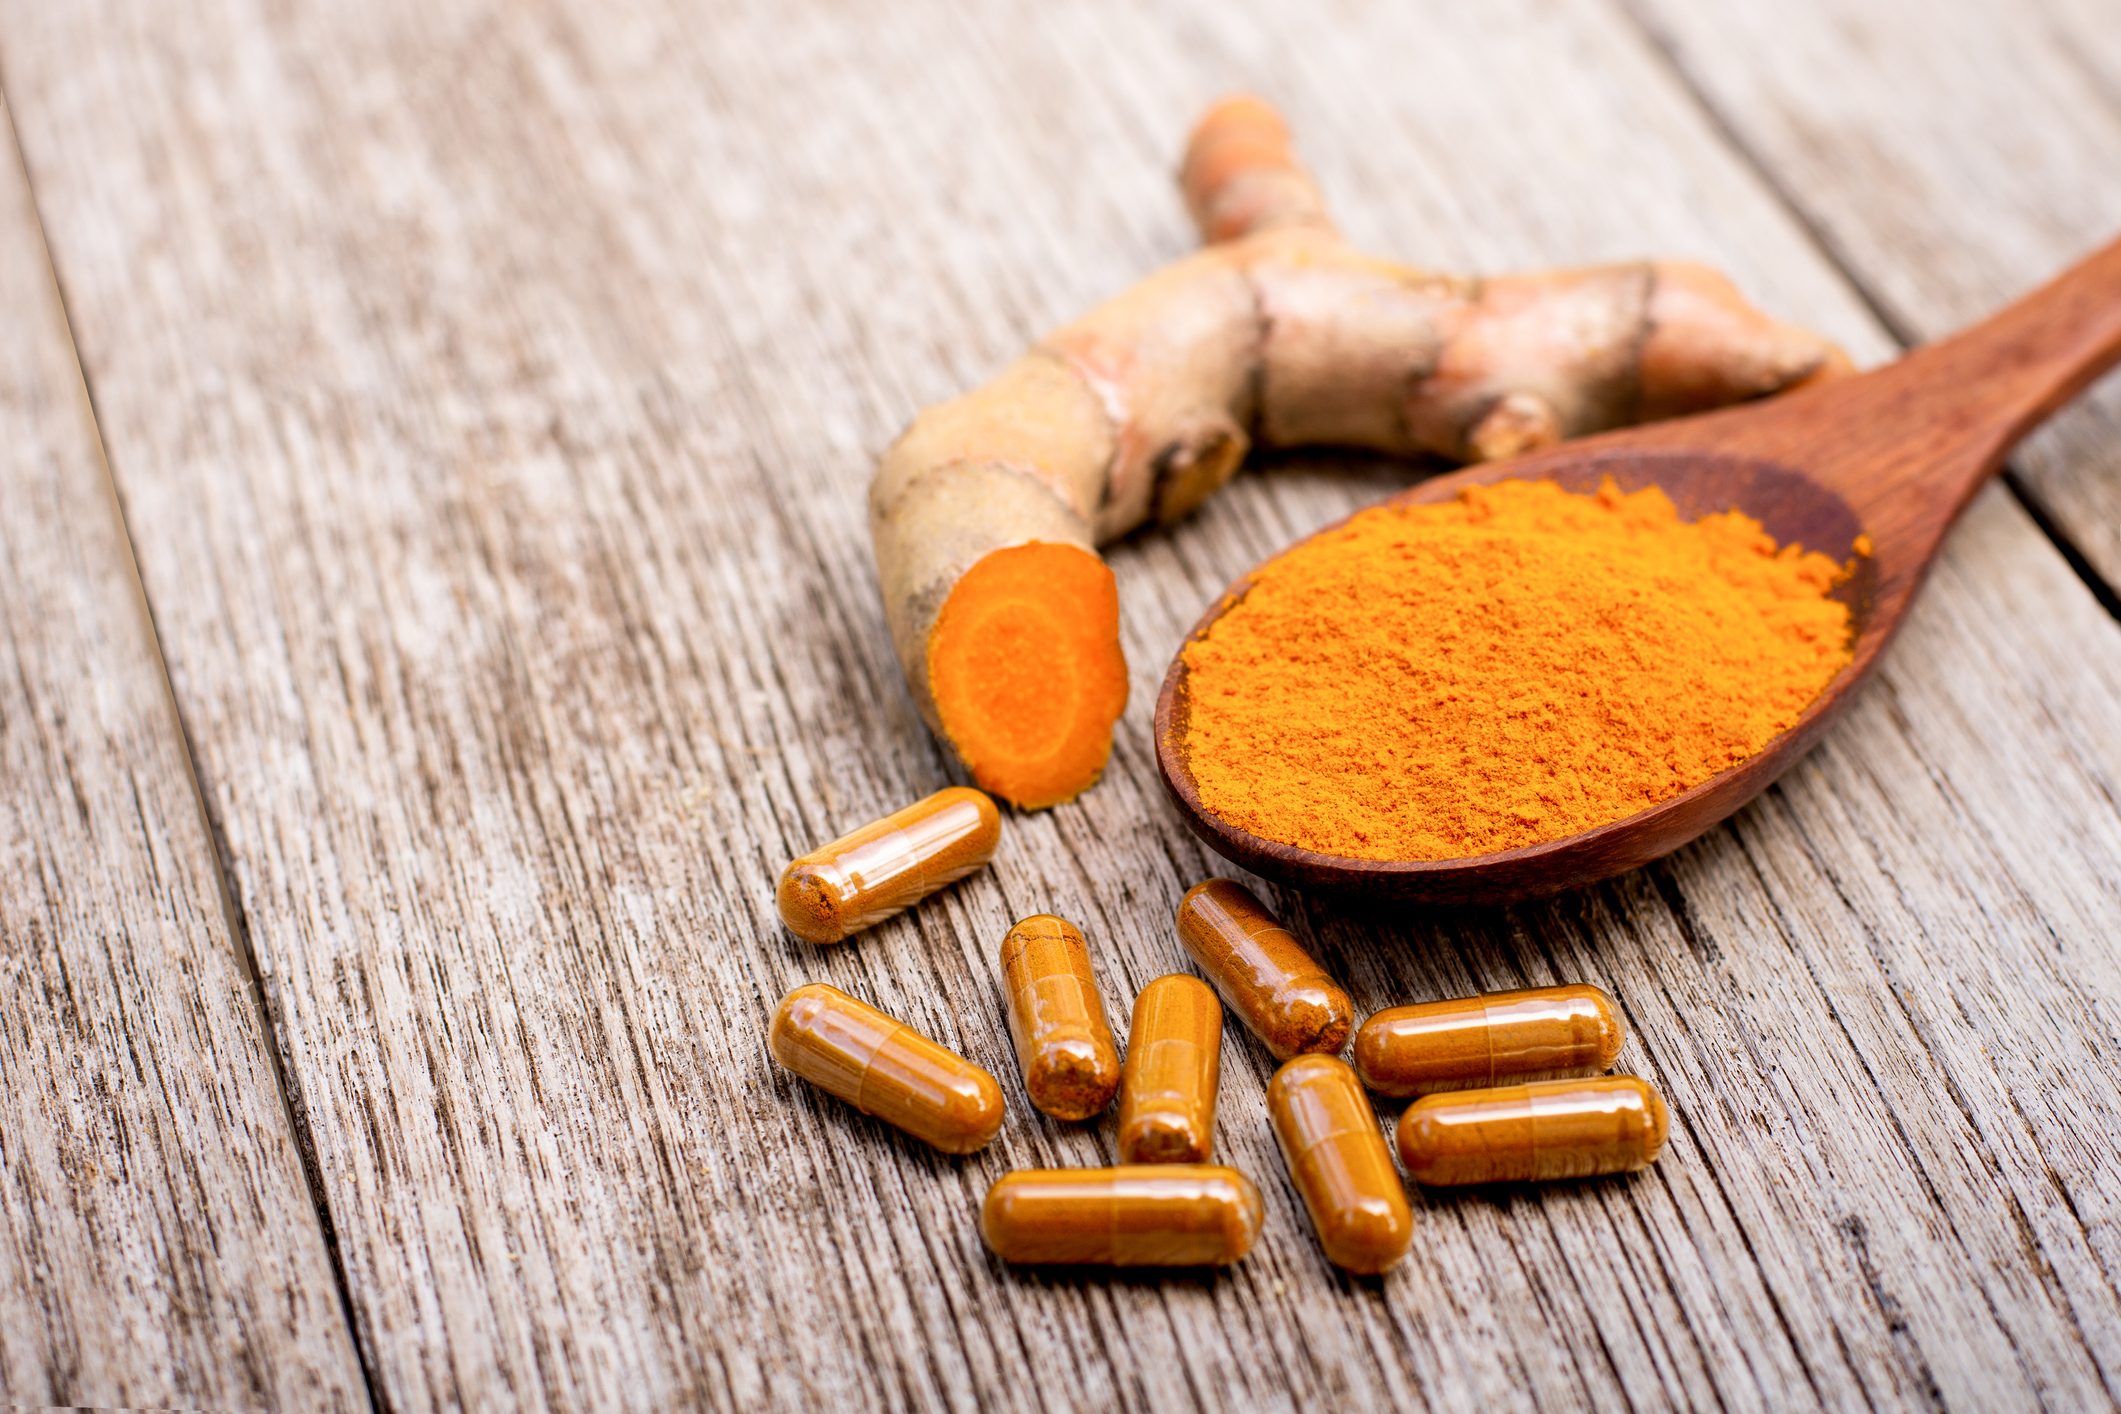 Curcumin: From spice to potent anti-viral